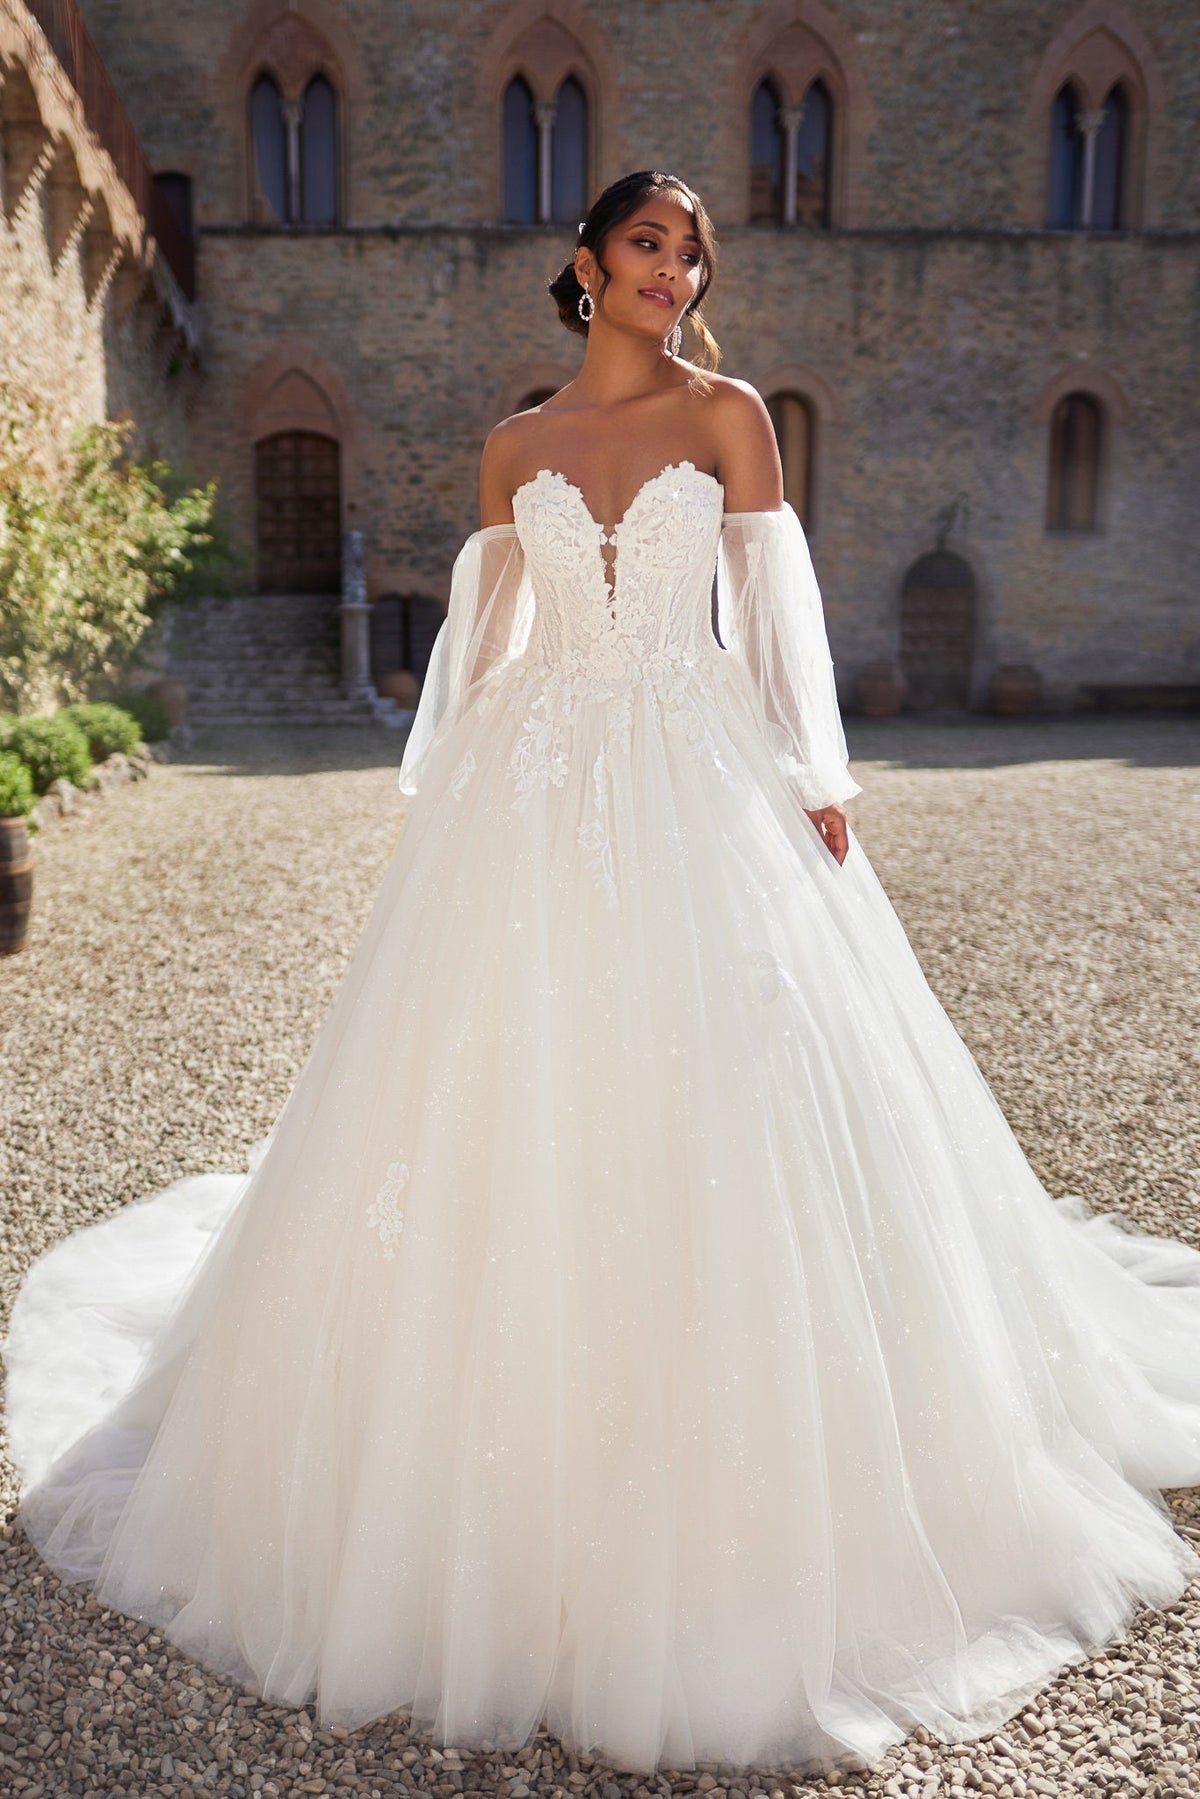 Romantic Off-Shoulder Ball Gown Wedding Dress with Detachable Puffy Sleeves and Intricate Lace Appliqués, Featuring a Sparkling Tulle Skirt